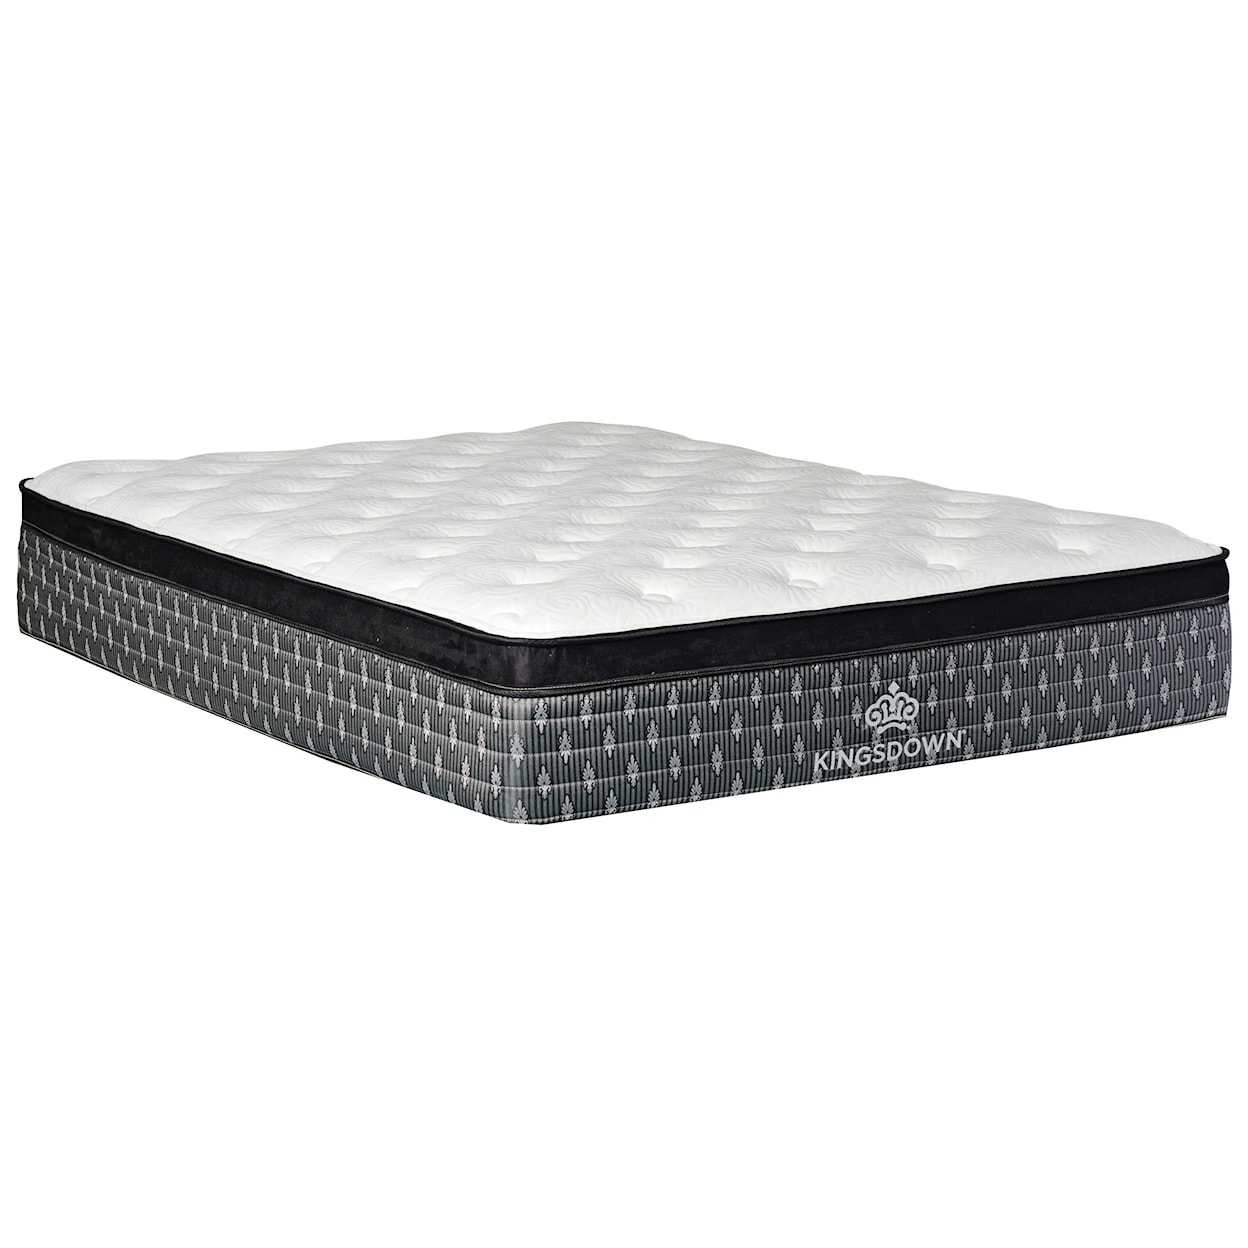 Kingsdown Passions Kamaria Twin 14 1/2" Pocketed Coil Mattress